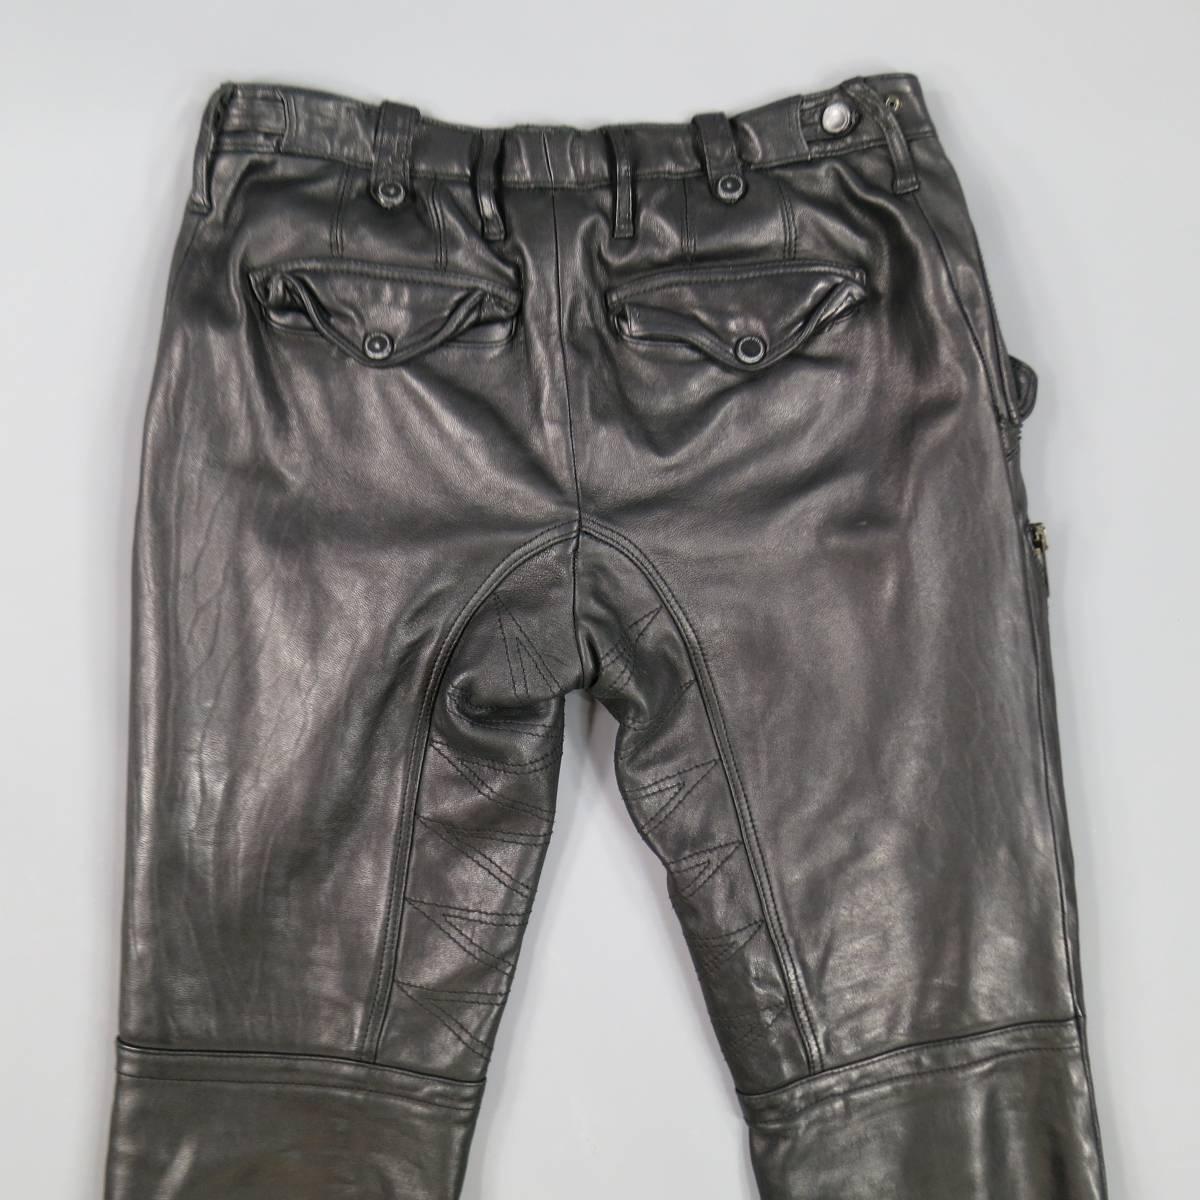 Men's BURBERRY PRORSUM Leather Pants - Size 31 Distressd Black Quilted Motorcycle